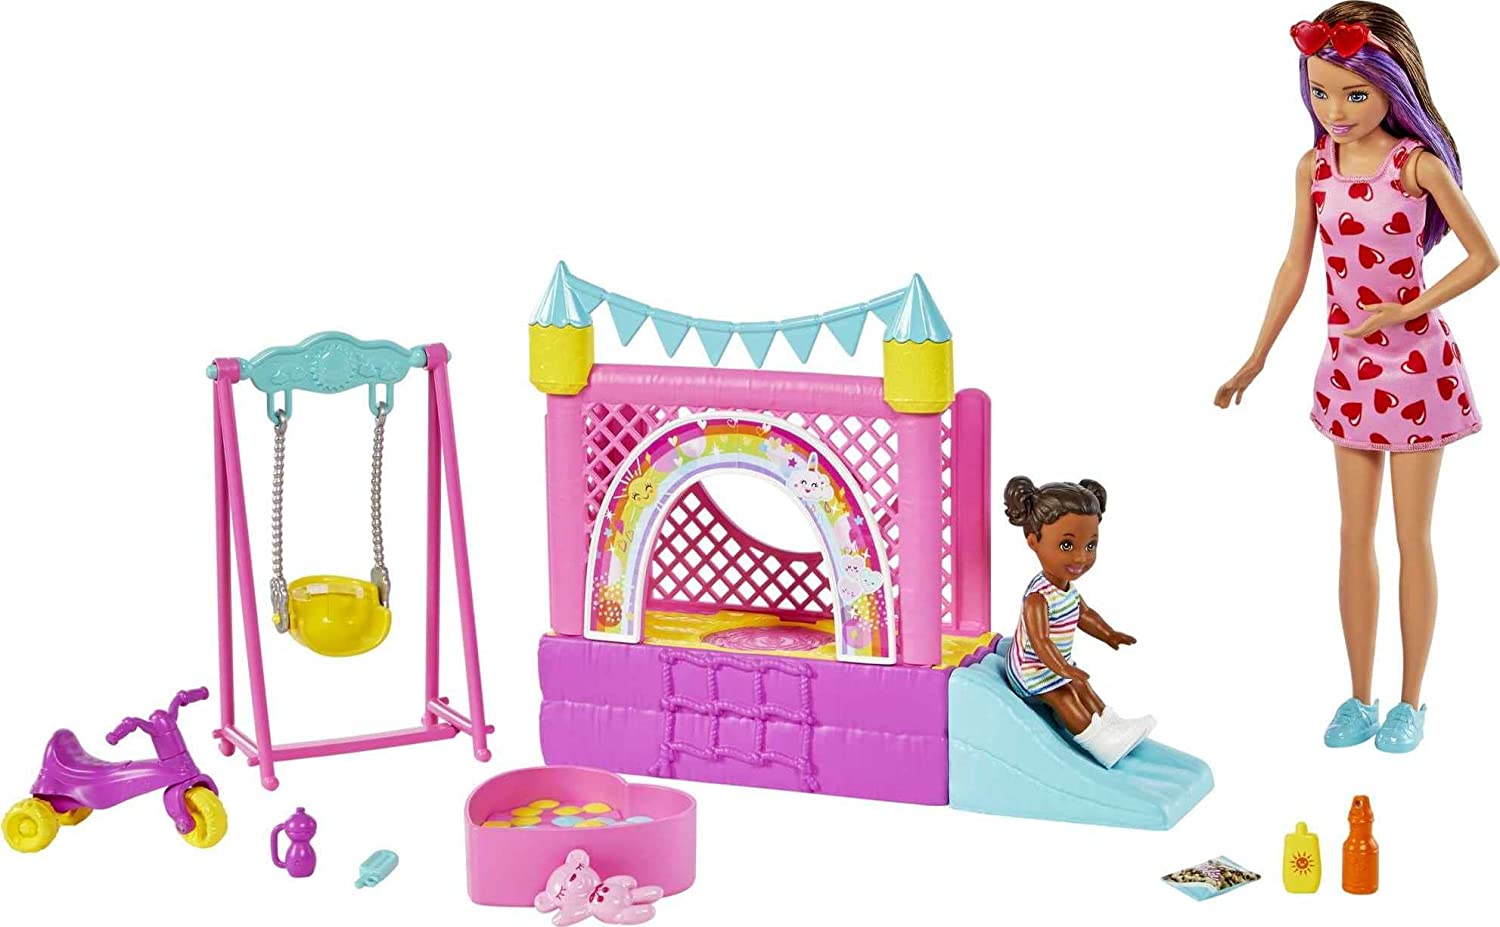 Barbie Skipper Babysitters Inc. Bounce House Playset with Skipper